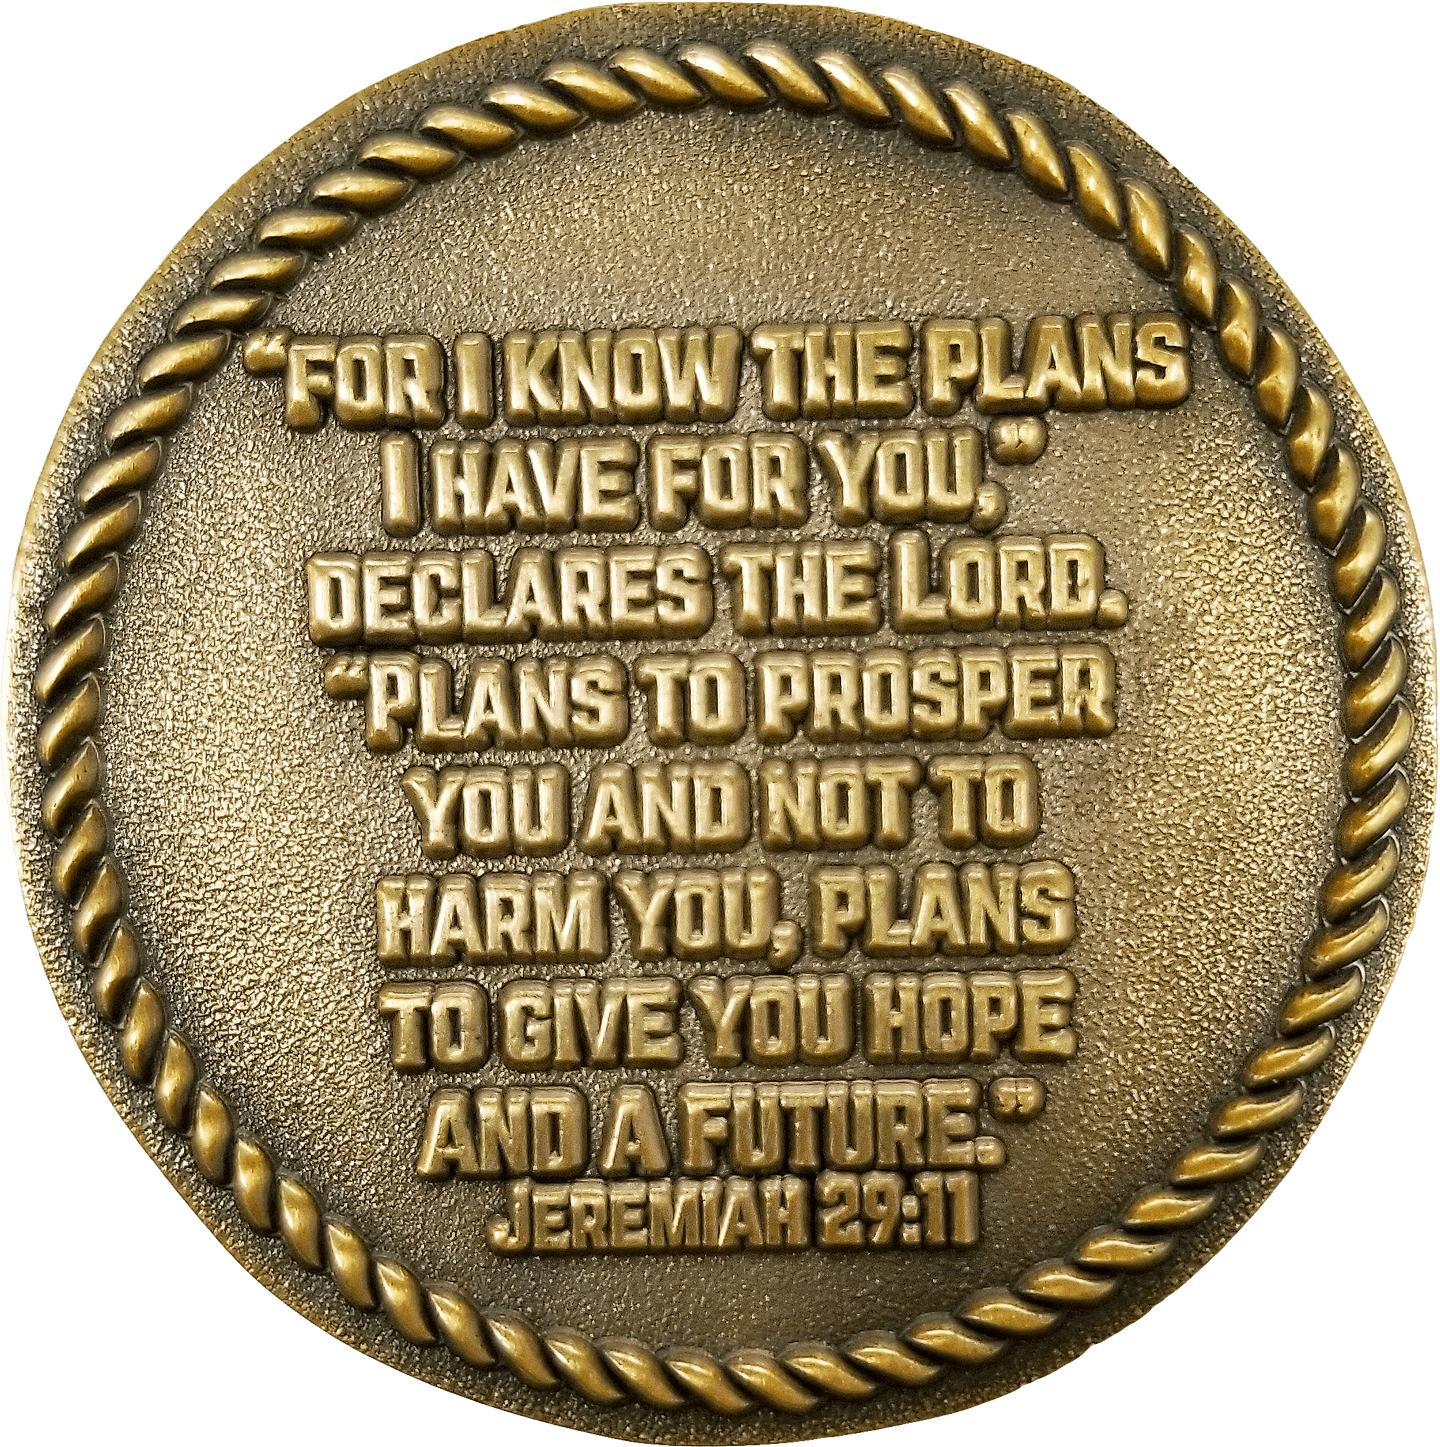 Back: "'For I know the plans I have for you,' declares the Lord. 'Plans to prosper you and not to harm you, plans to give you hope and a future.' Jeremiah 29:11"